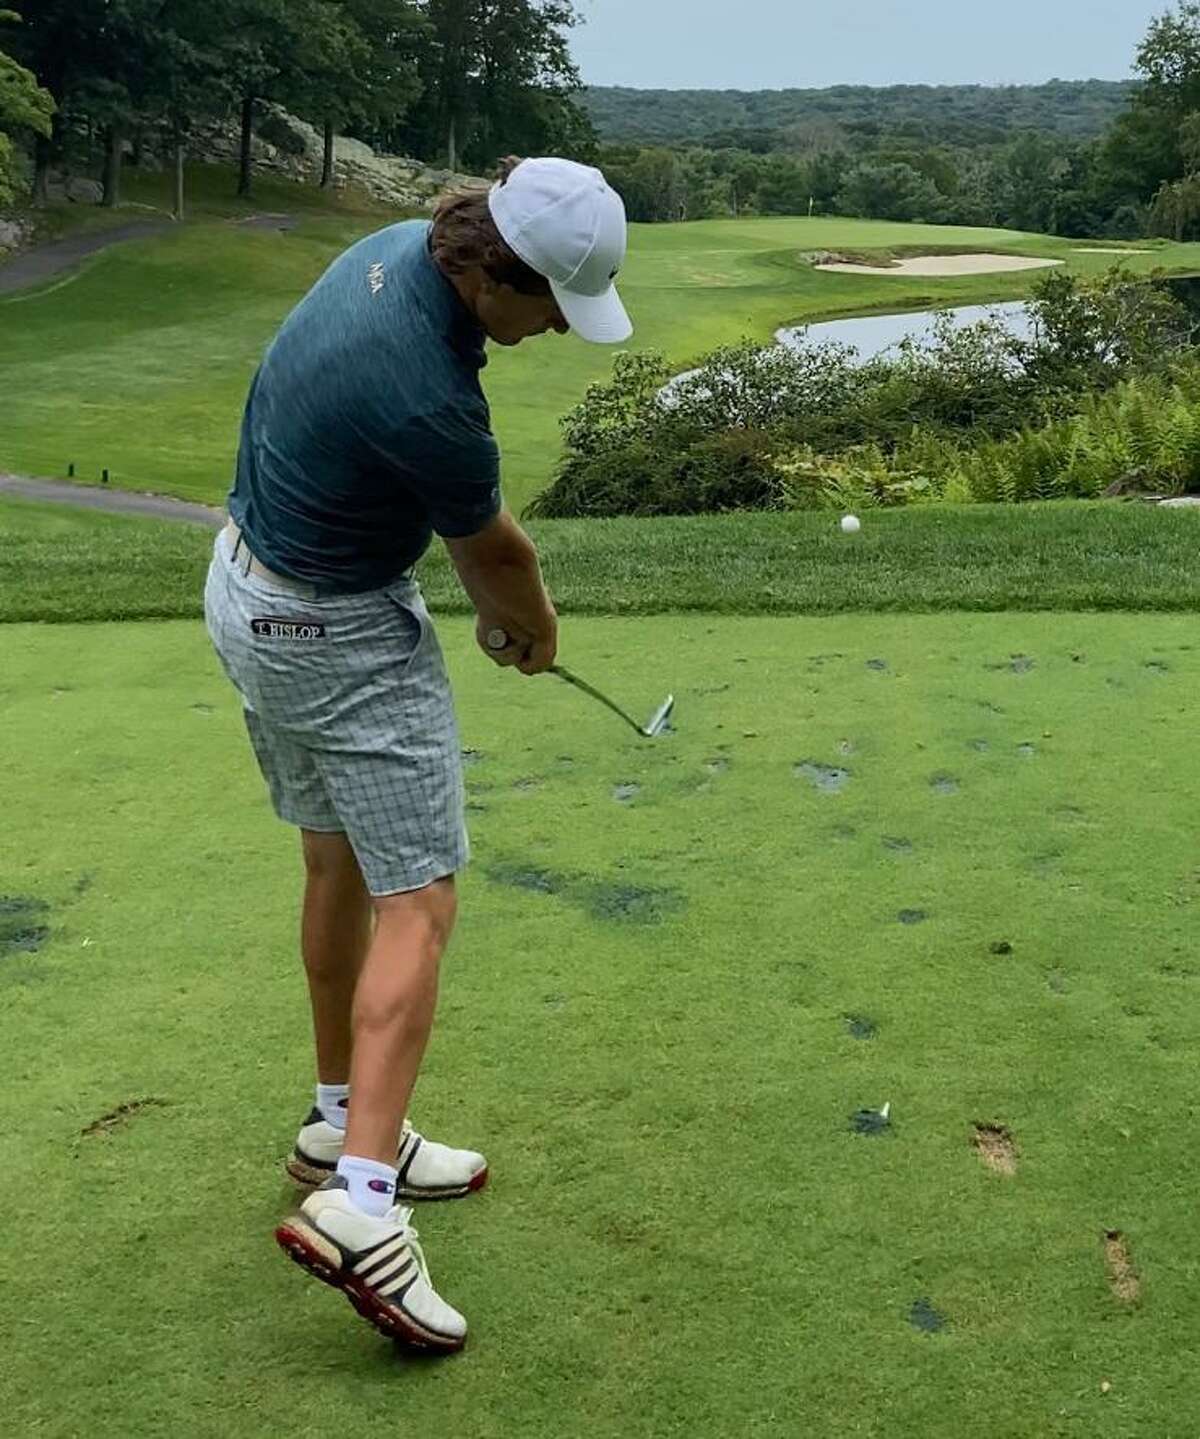 Newtown's Trevor Hislop was faced with the tough decision of selecting between football and golf this fall. The senior chose golf.